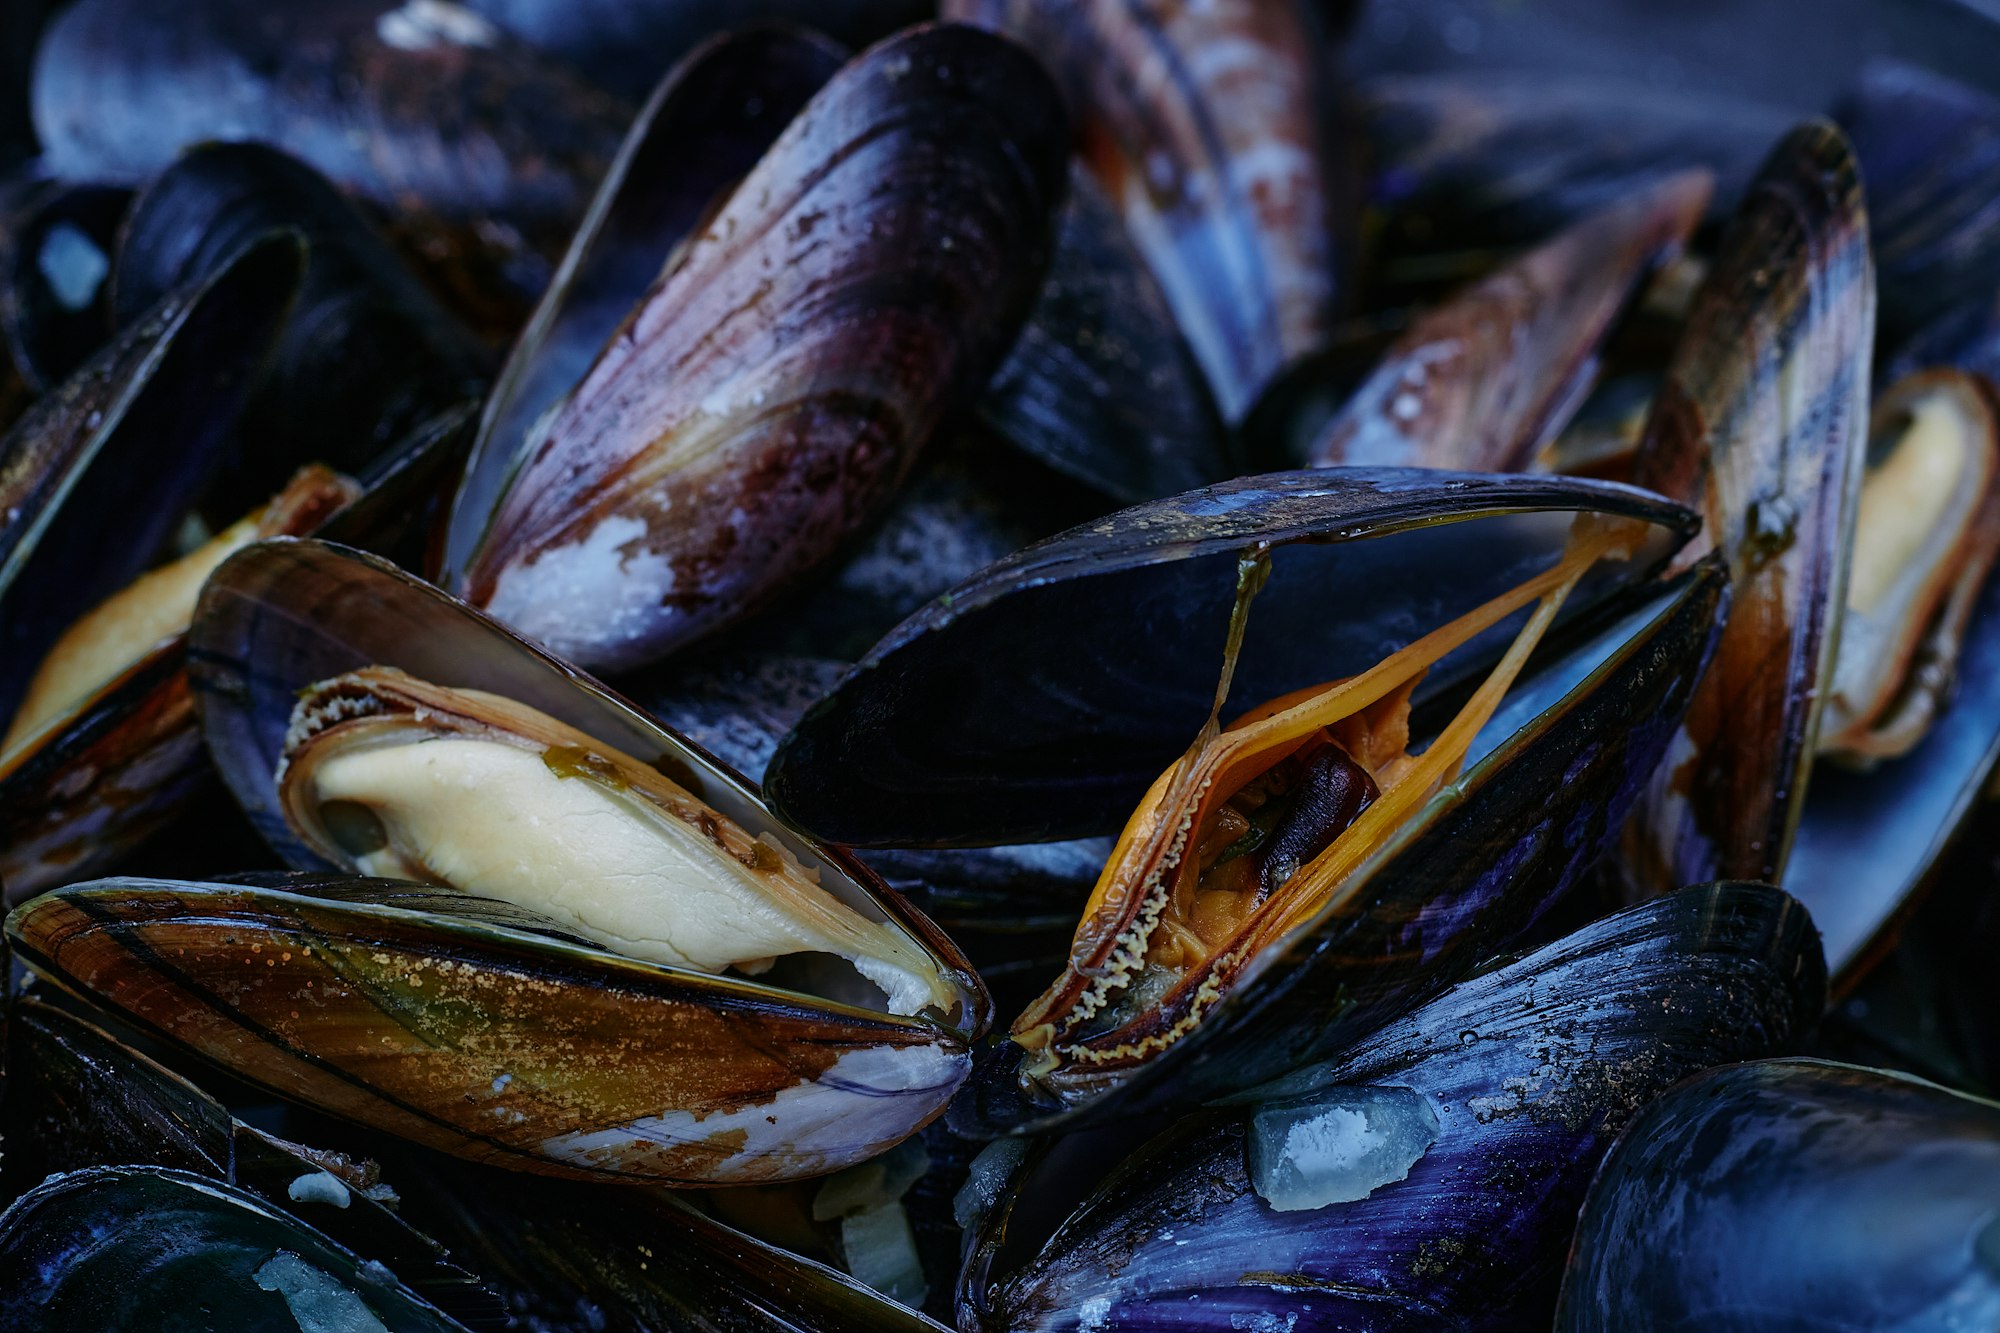 Mollusks: Mussels, Snails, Clams, and Co